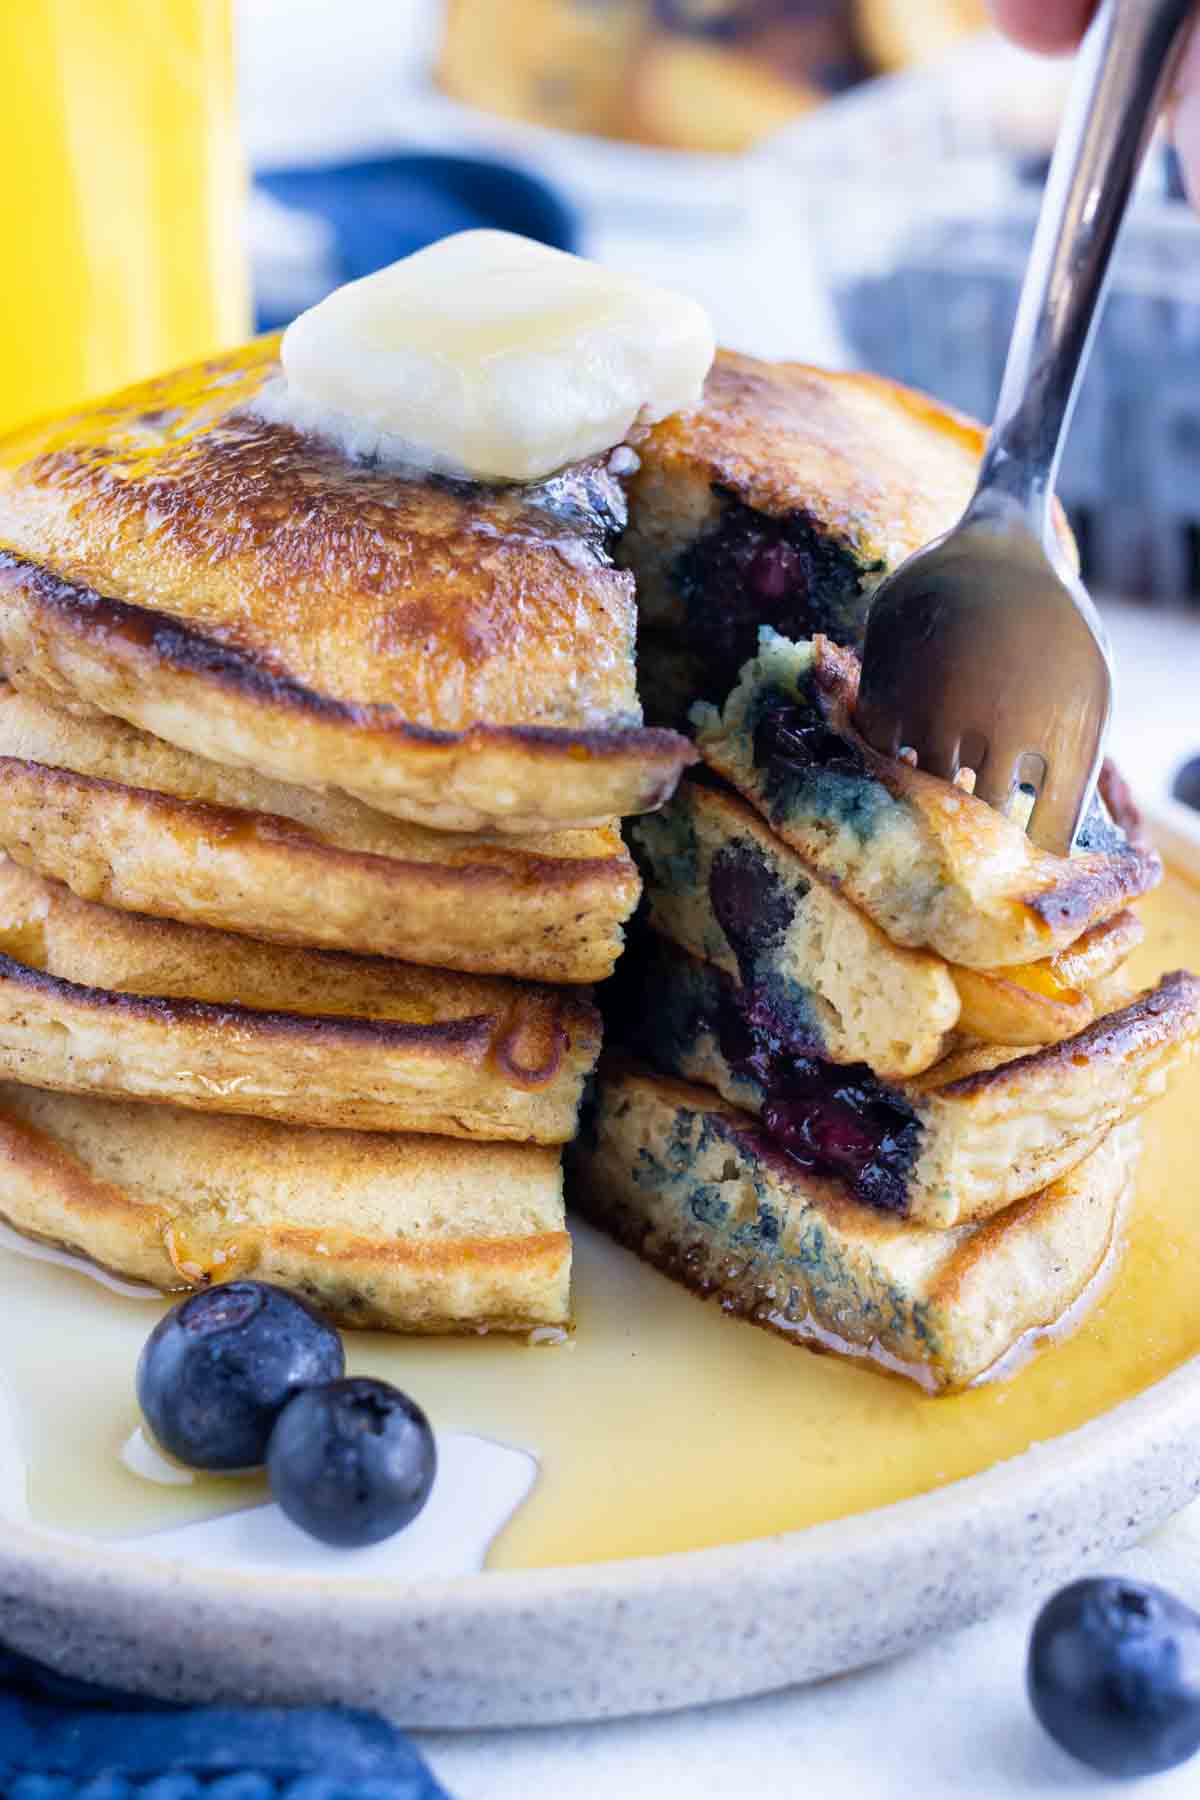 A fork is used to enjoy blueberry pancakes.